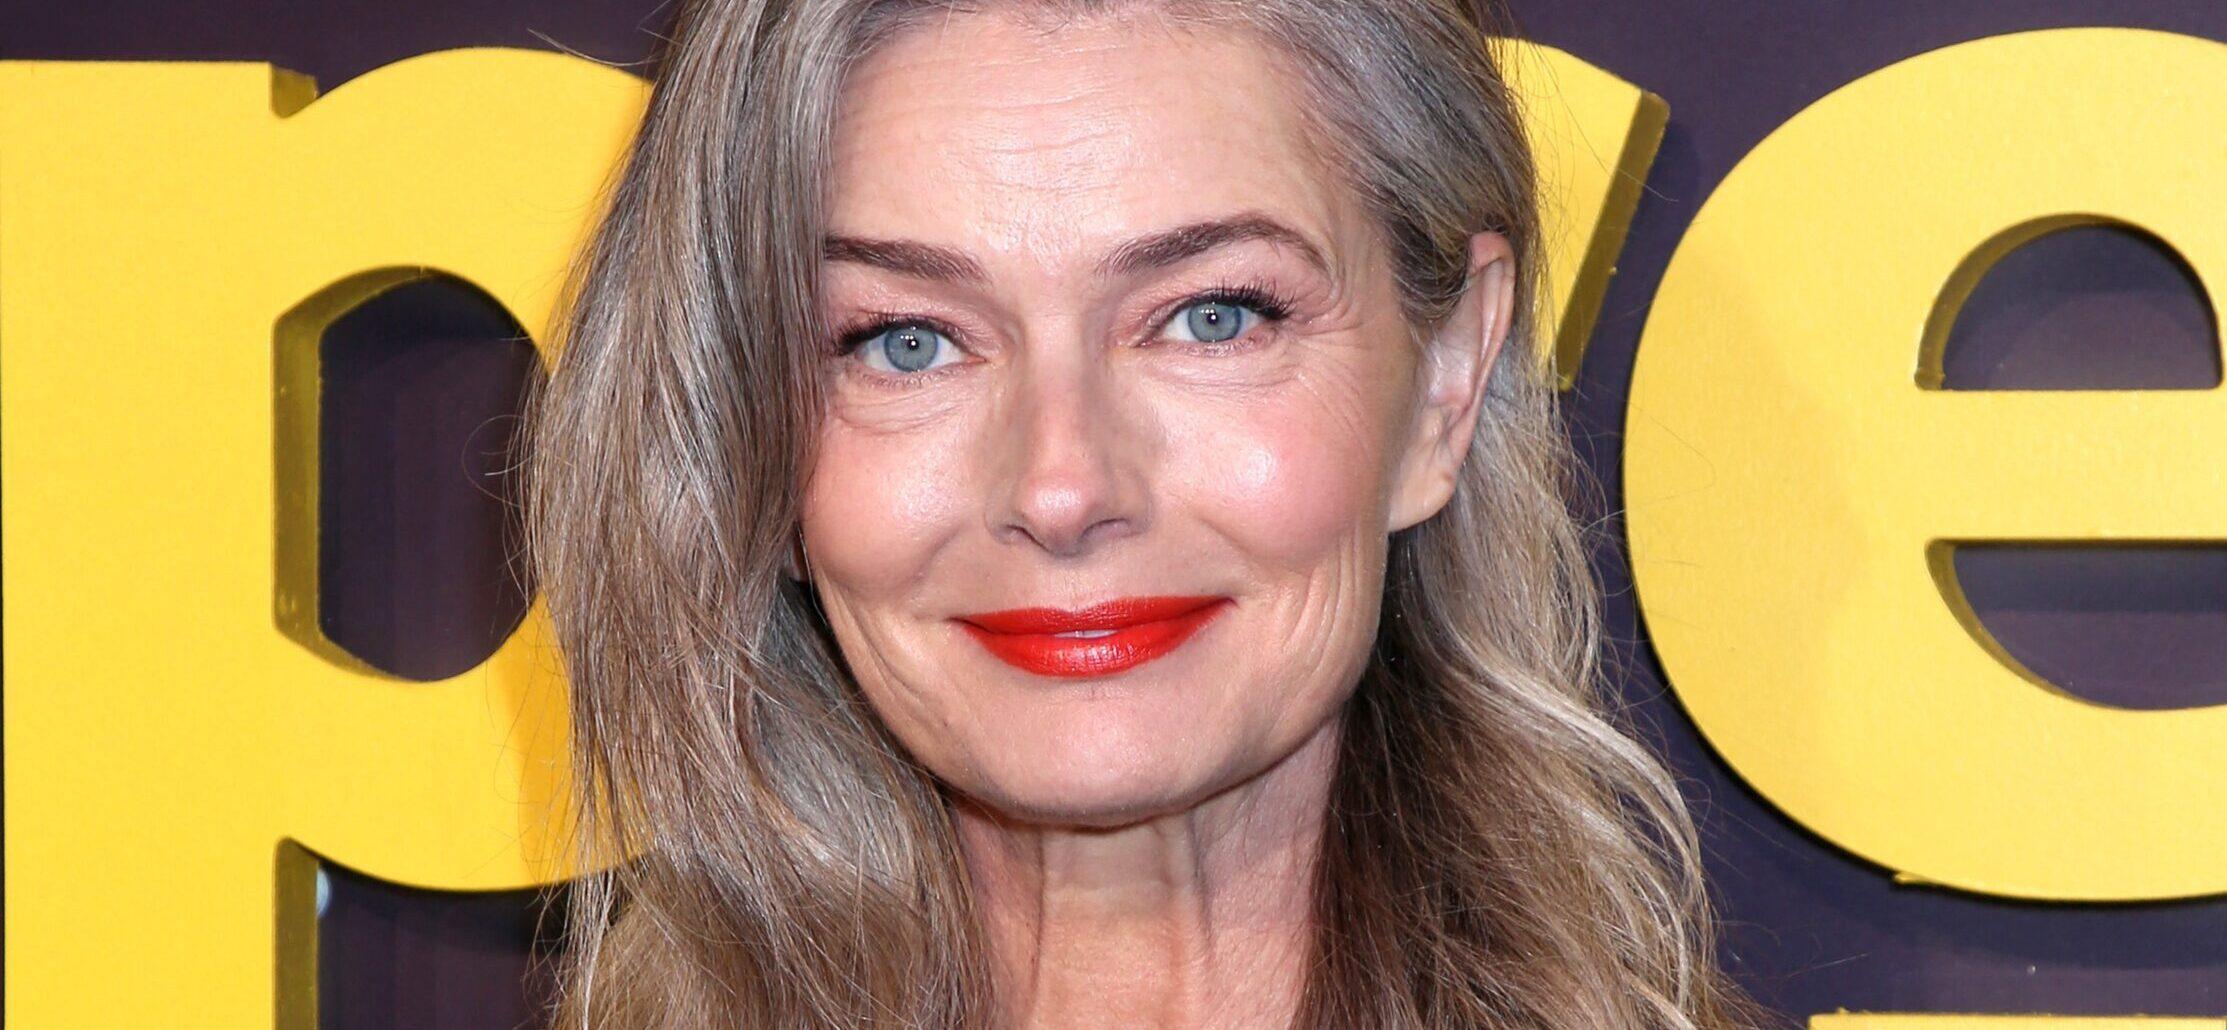 Paulina Porizkova In Nothing Beneath Her Open Robe Shows Hip Replacement Surgery Scars As ‘Reminder Of Old Pain’